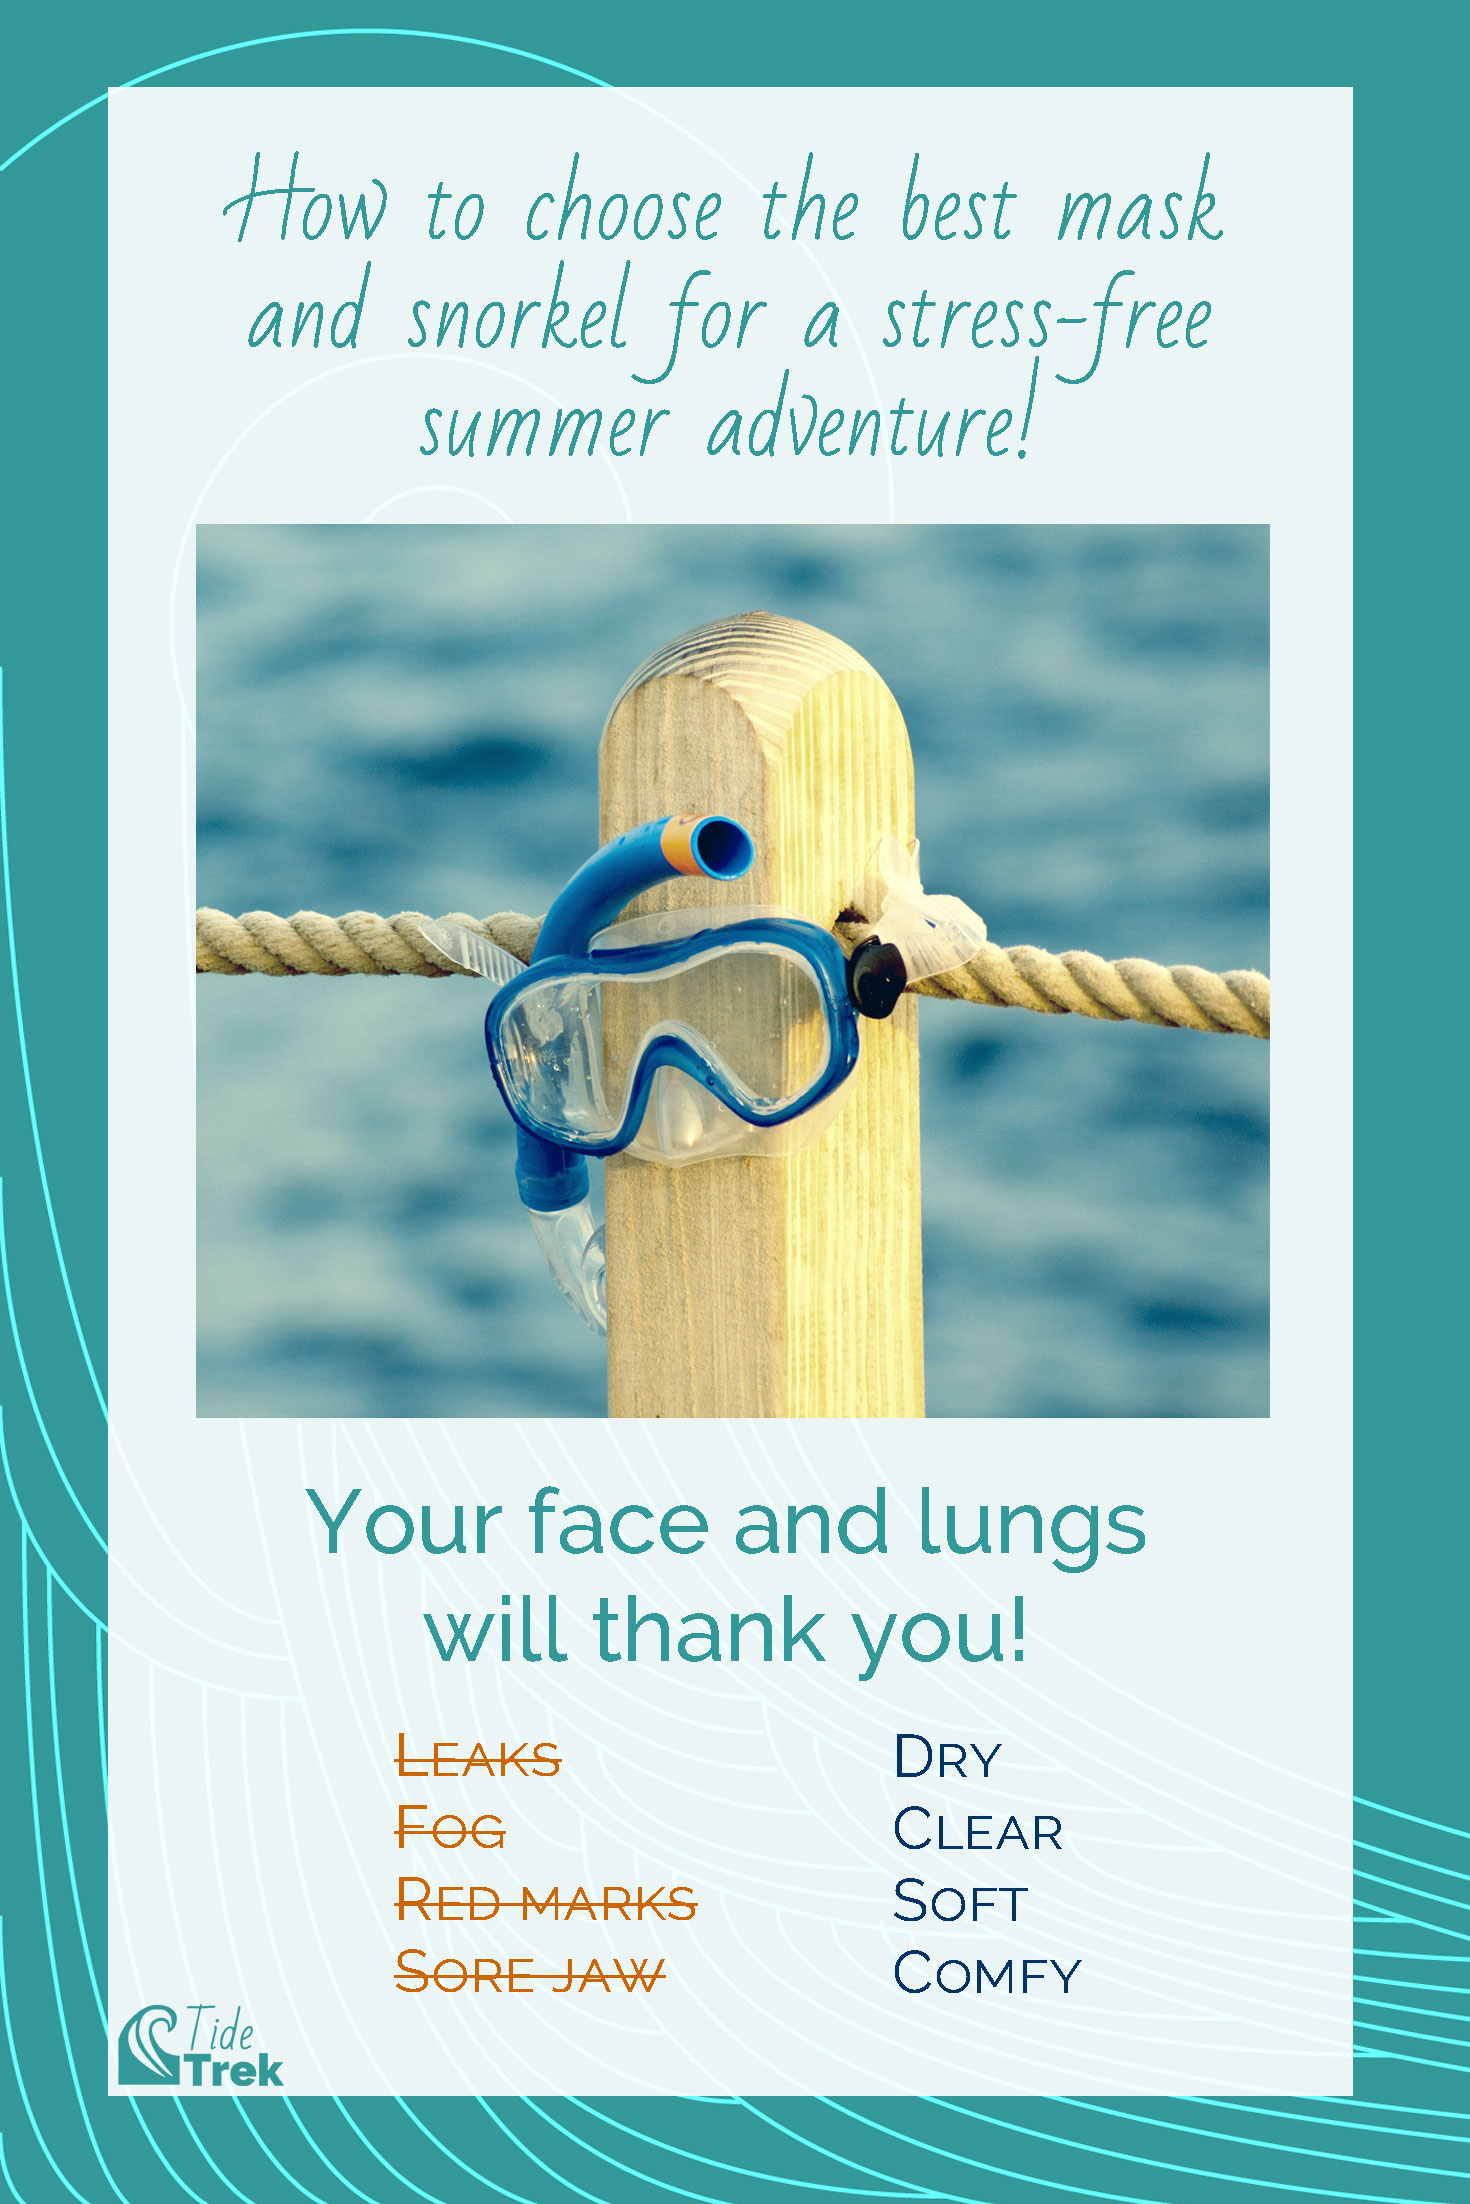 Photo of a mask and snorkel hanging off a wooden post with text overlay saying how to choose the best mask and snorkel